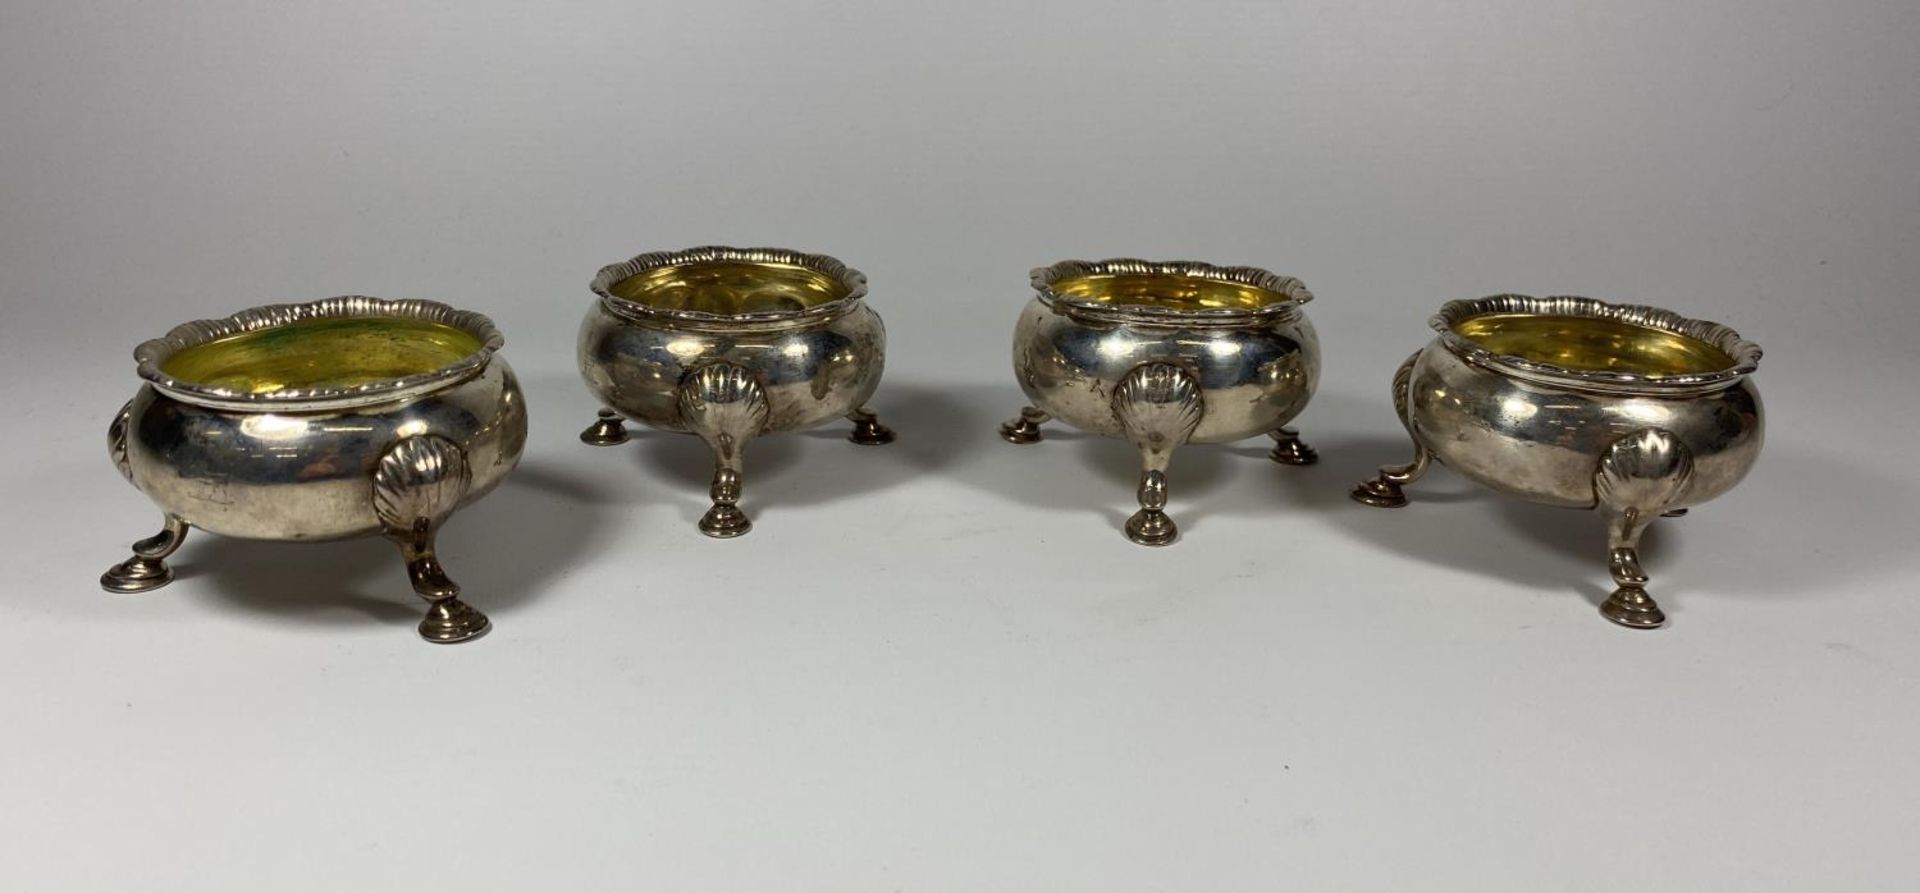 A SET OF FOUR GEORGE II SALT CELLARS ON HOOF FEET, DATES TO LONDON, 1752, TOTAL WEIGHT 392G